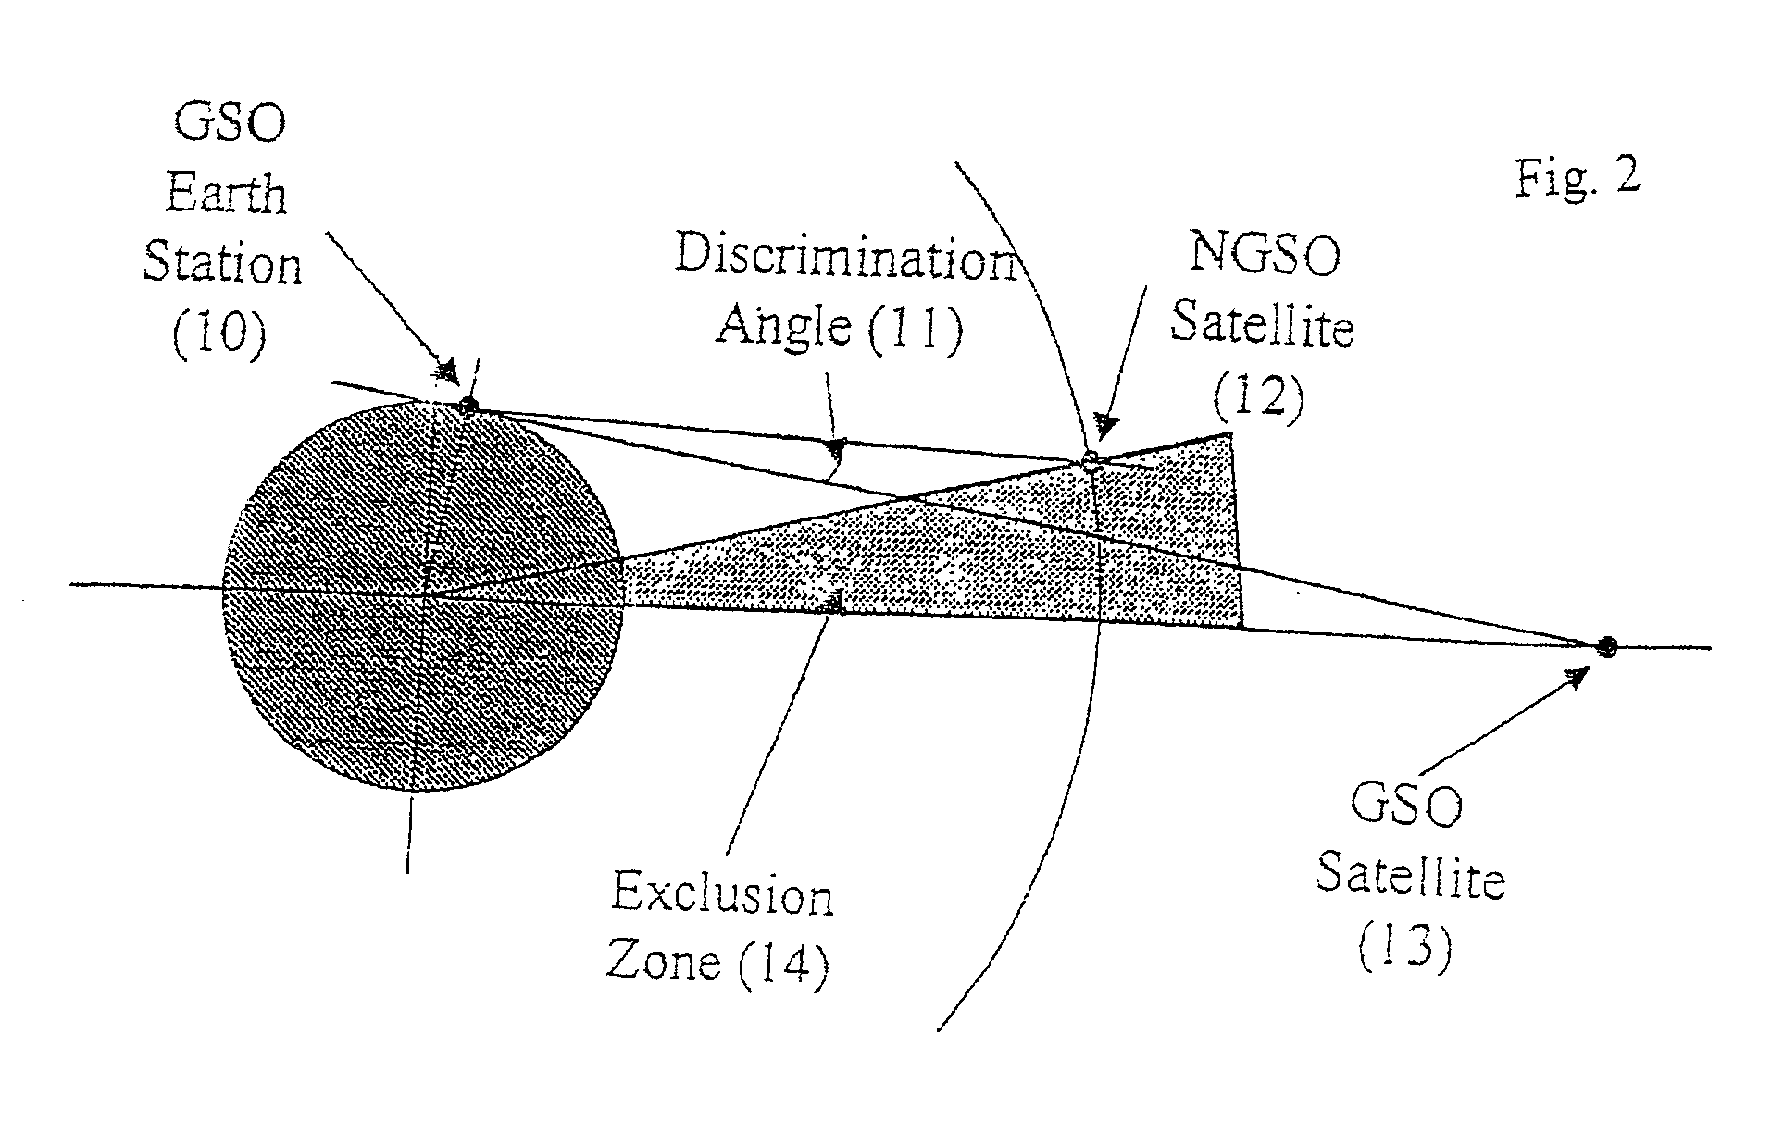 Method for limiting interference between satellite communications systems